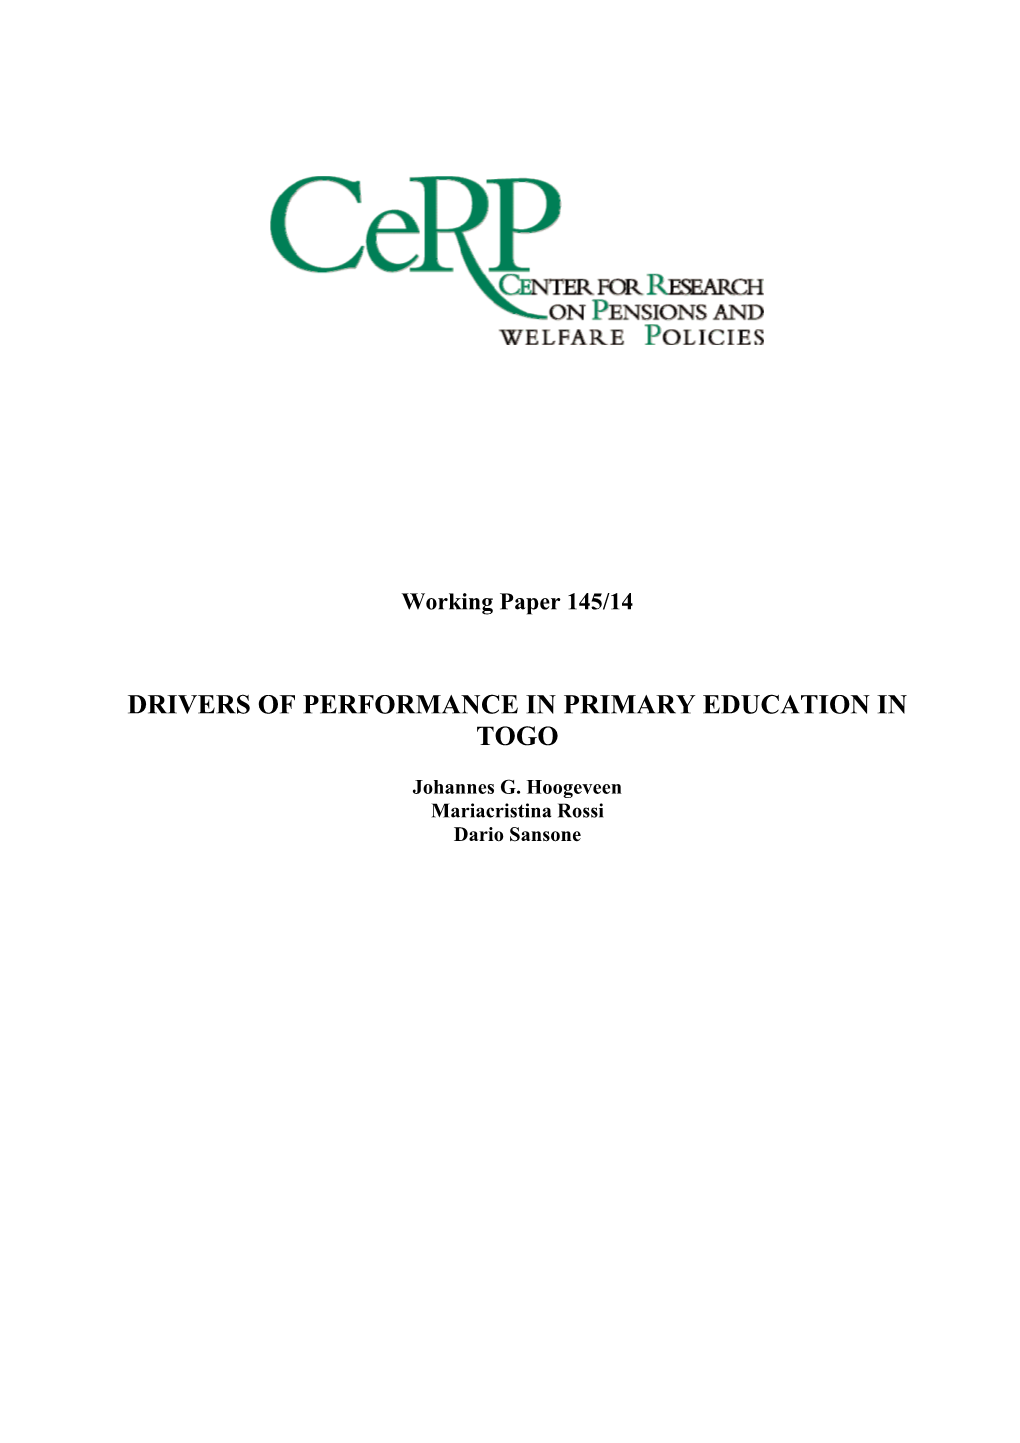 Drivers of Performance in Primary Education in Togo